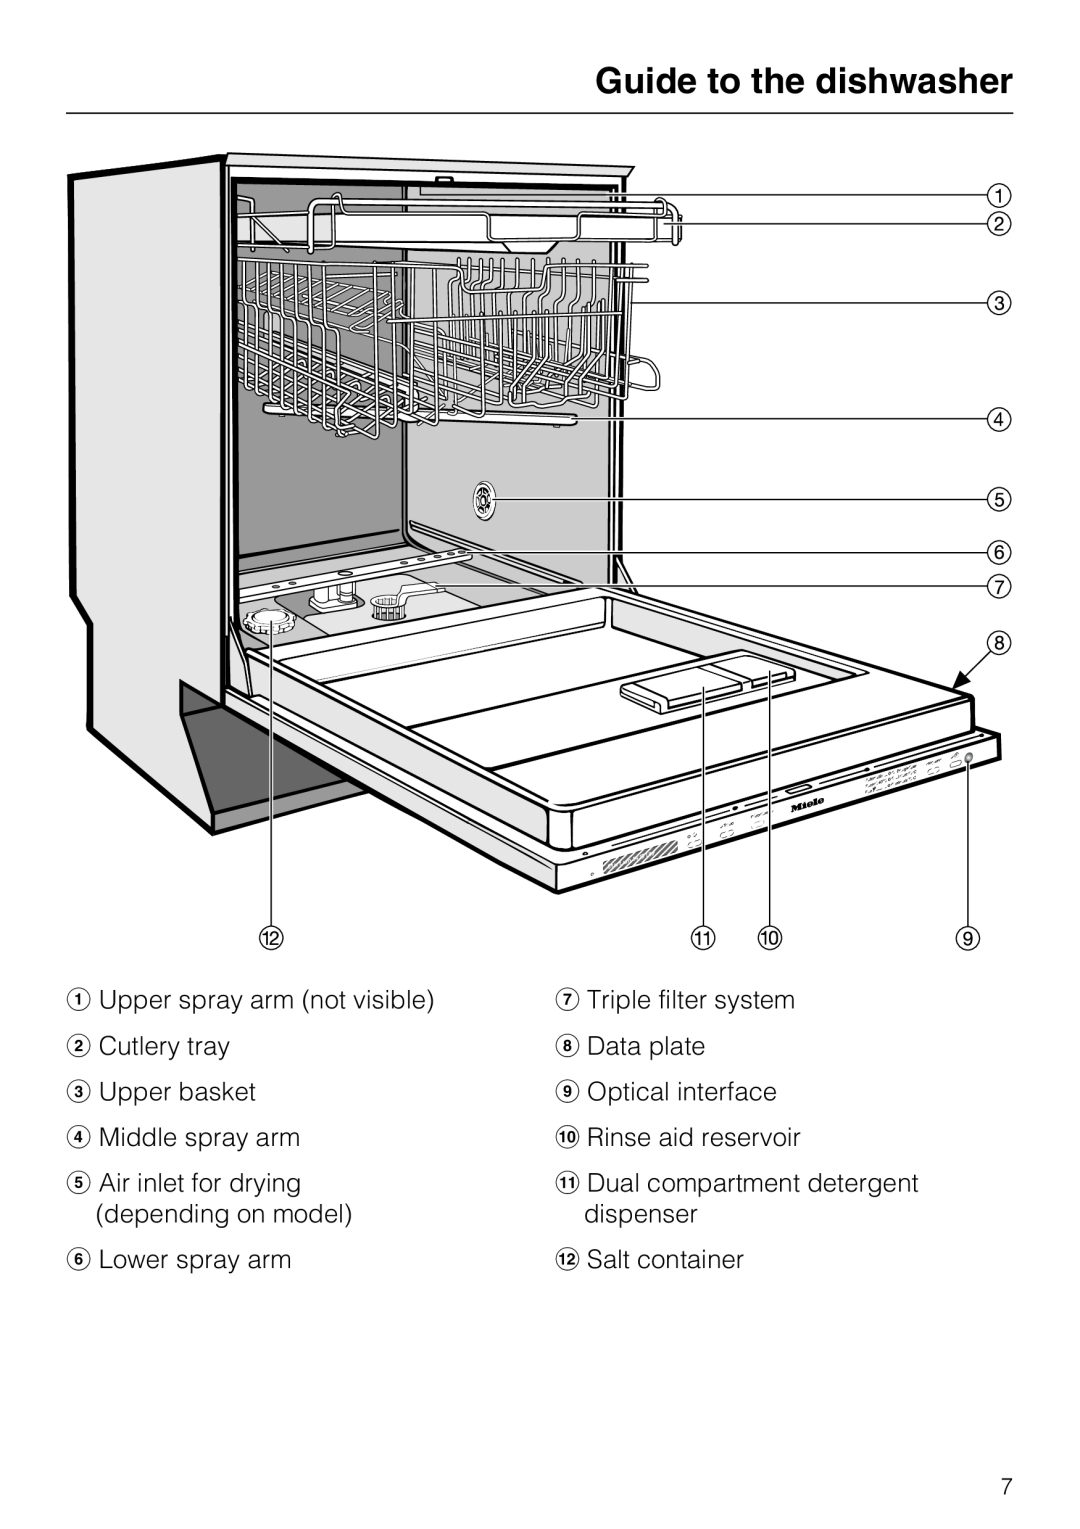 Miele G 5575, G 5570 manual Guide to the dishwasher, Upper spray arm not visible Cutlery tray, Upper basket Middle spray arm 